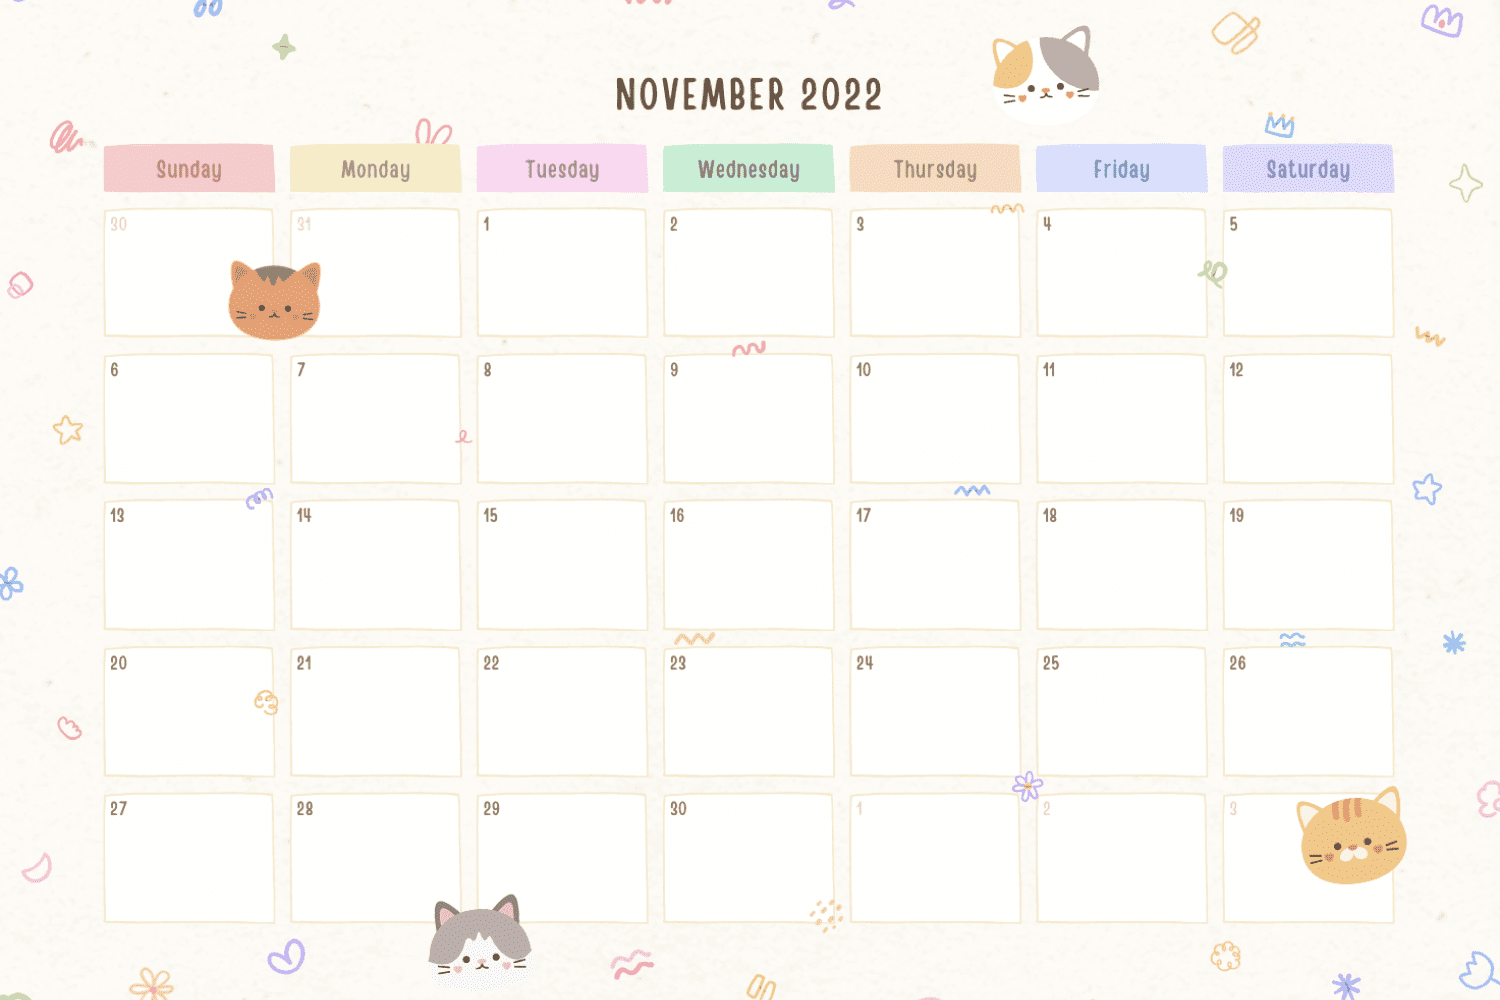 Calendar for November with drawn faces of cats.